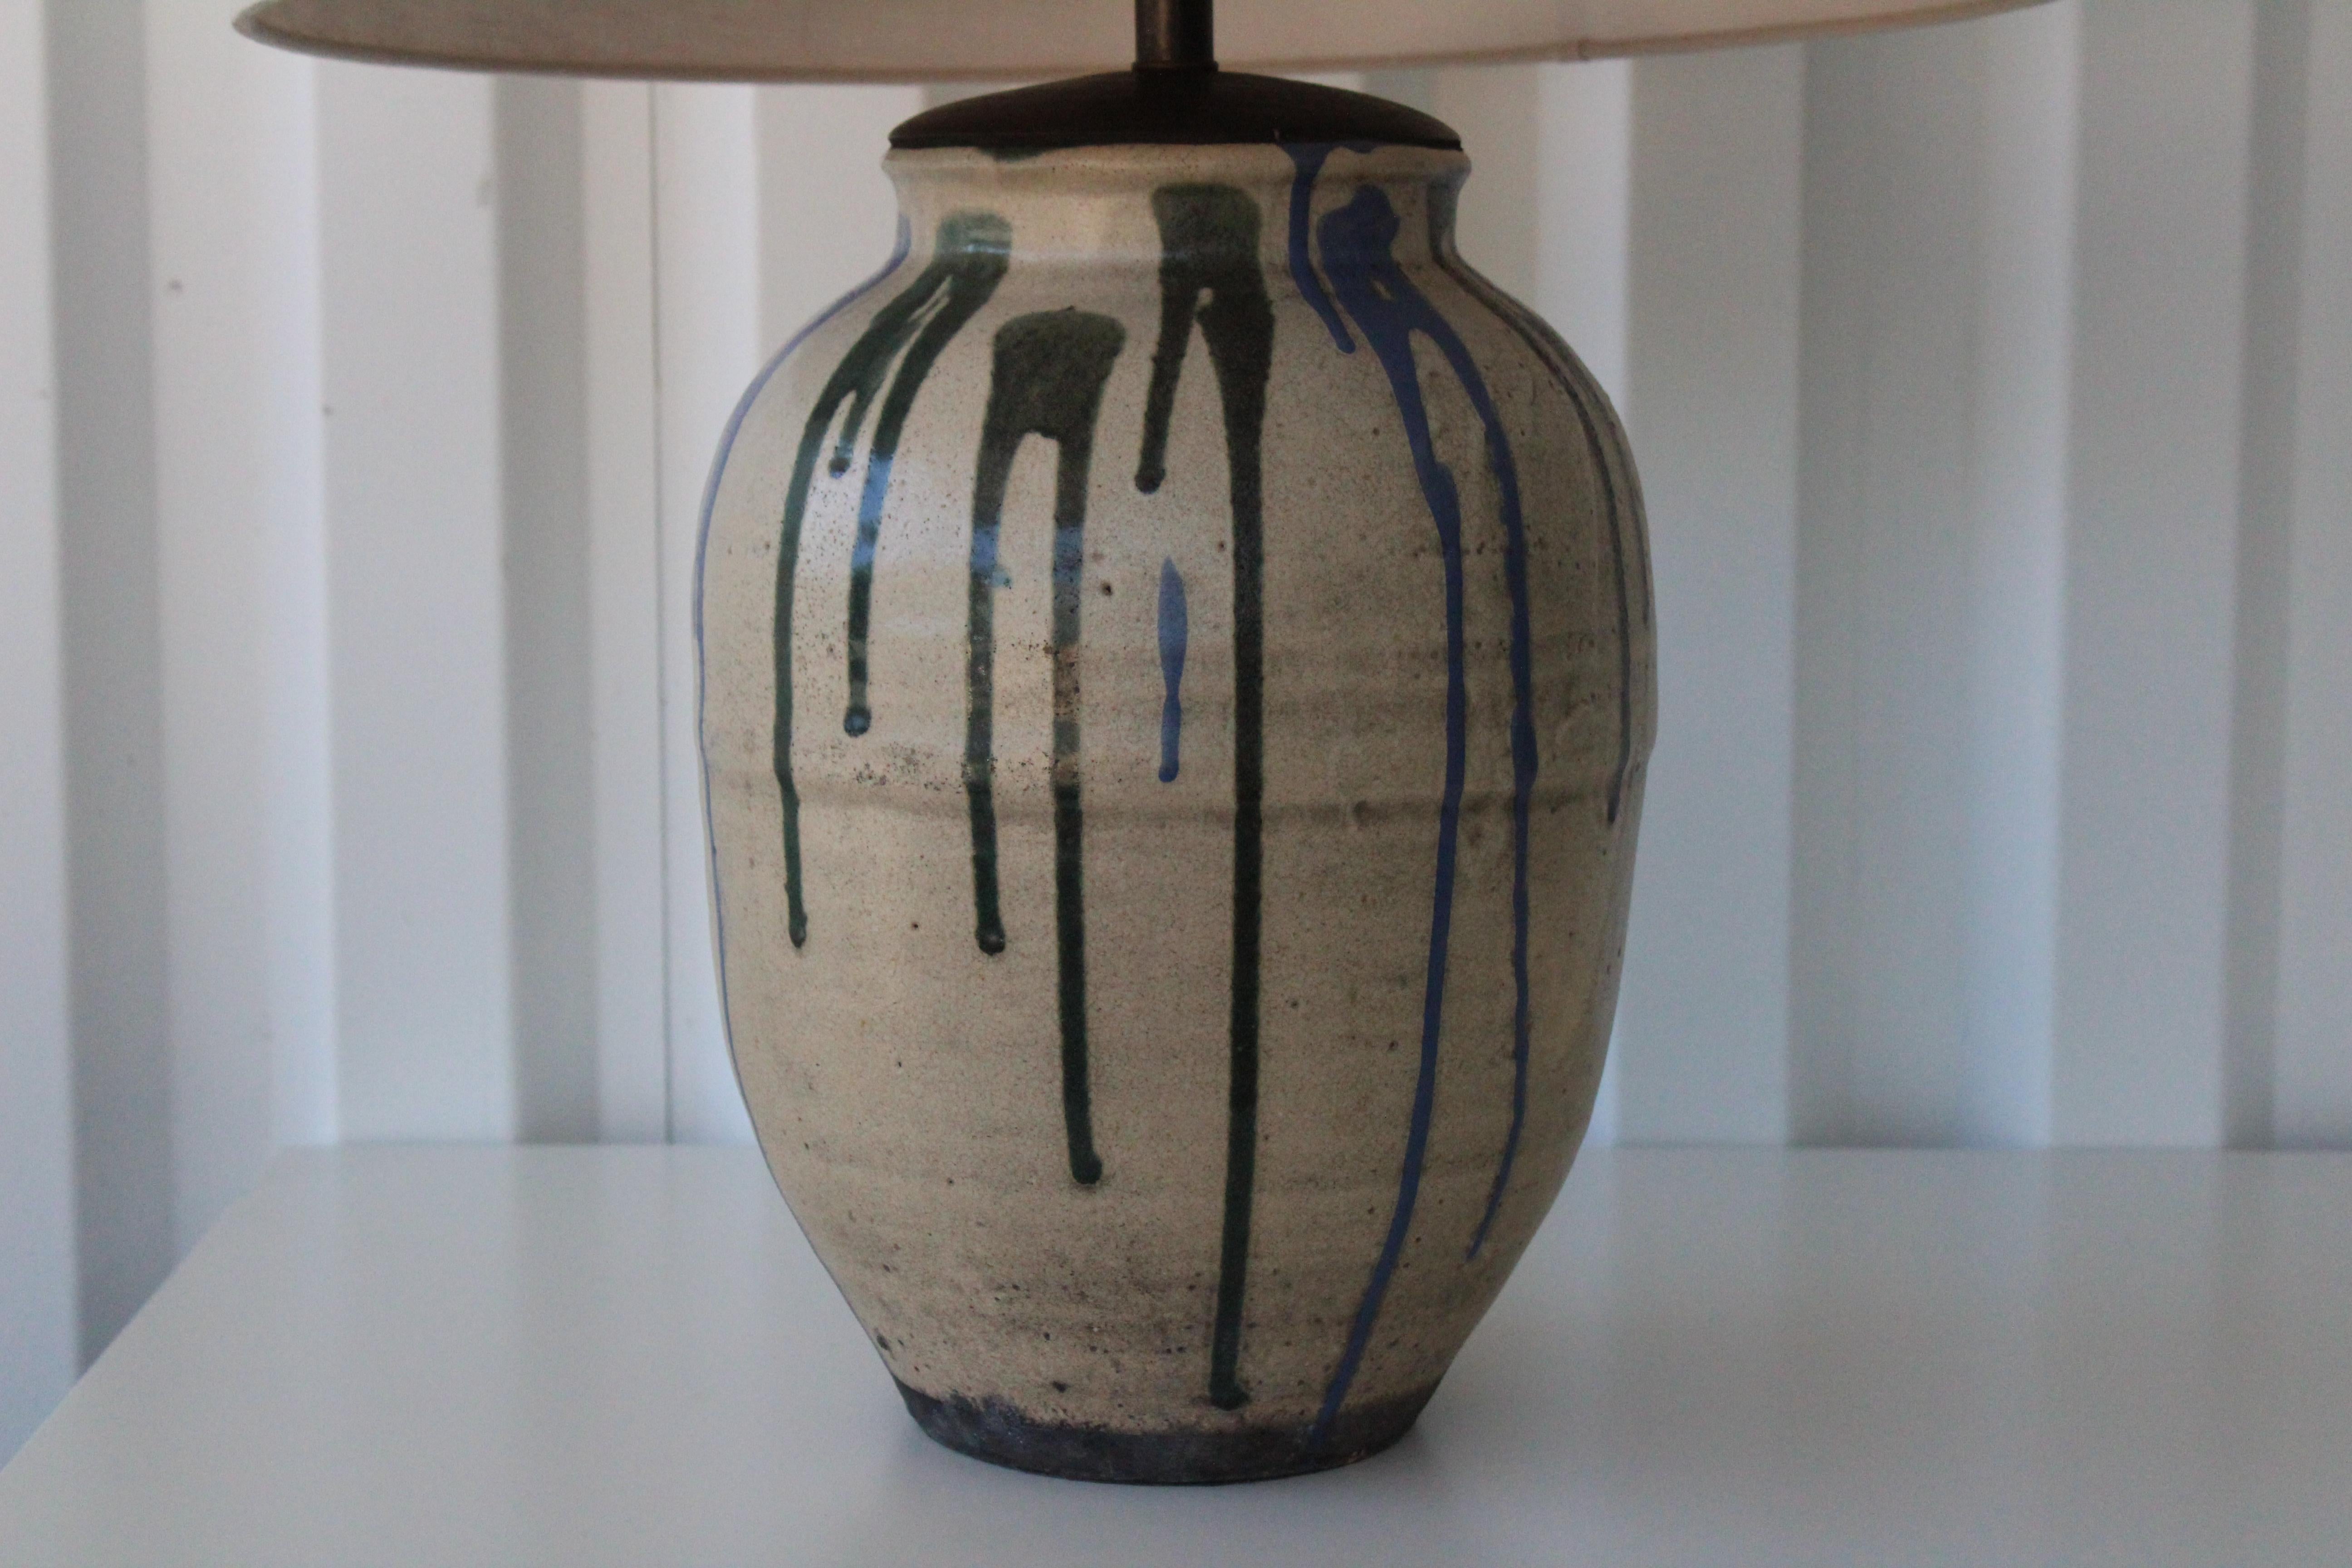 1960s Japanese pottery vase custom made into a table lamp. Blue and green drip glazed. Newly rewired and fitted with a custom linen shade.